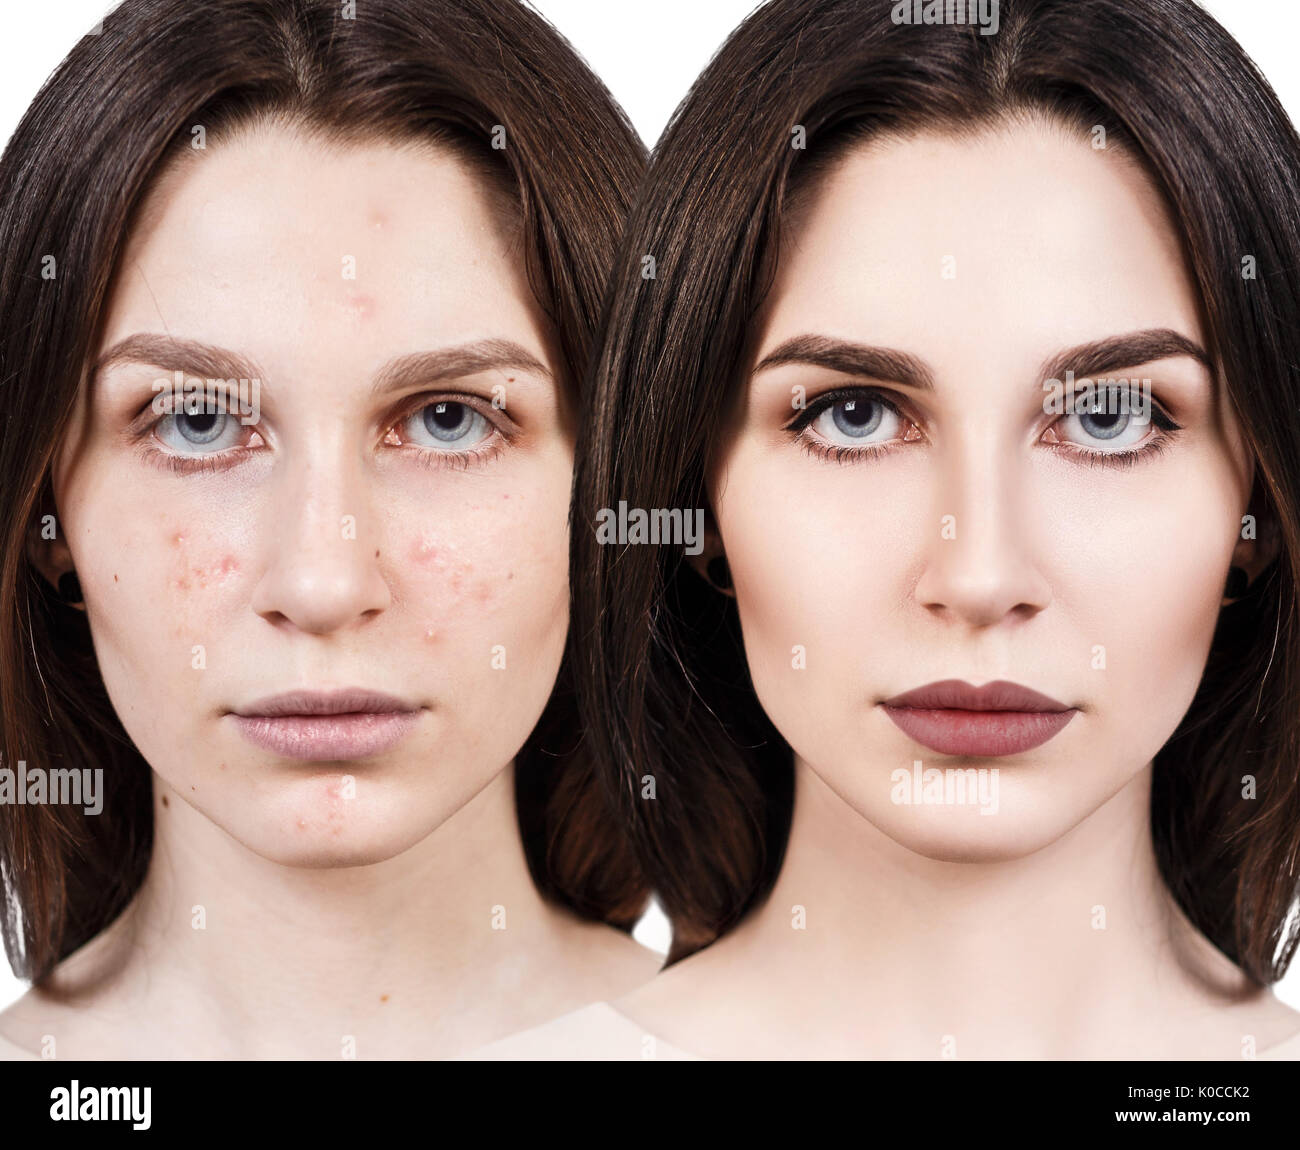 Girl with acne before and after treatment Stock Photo